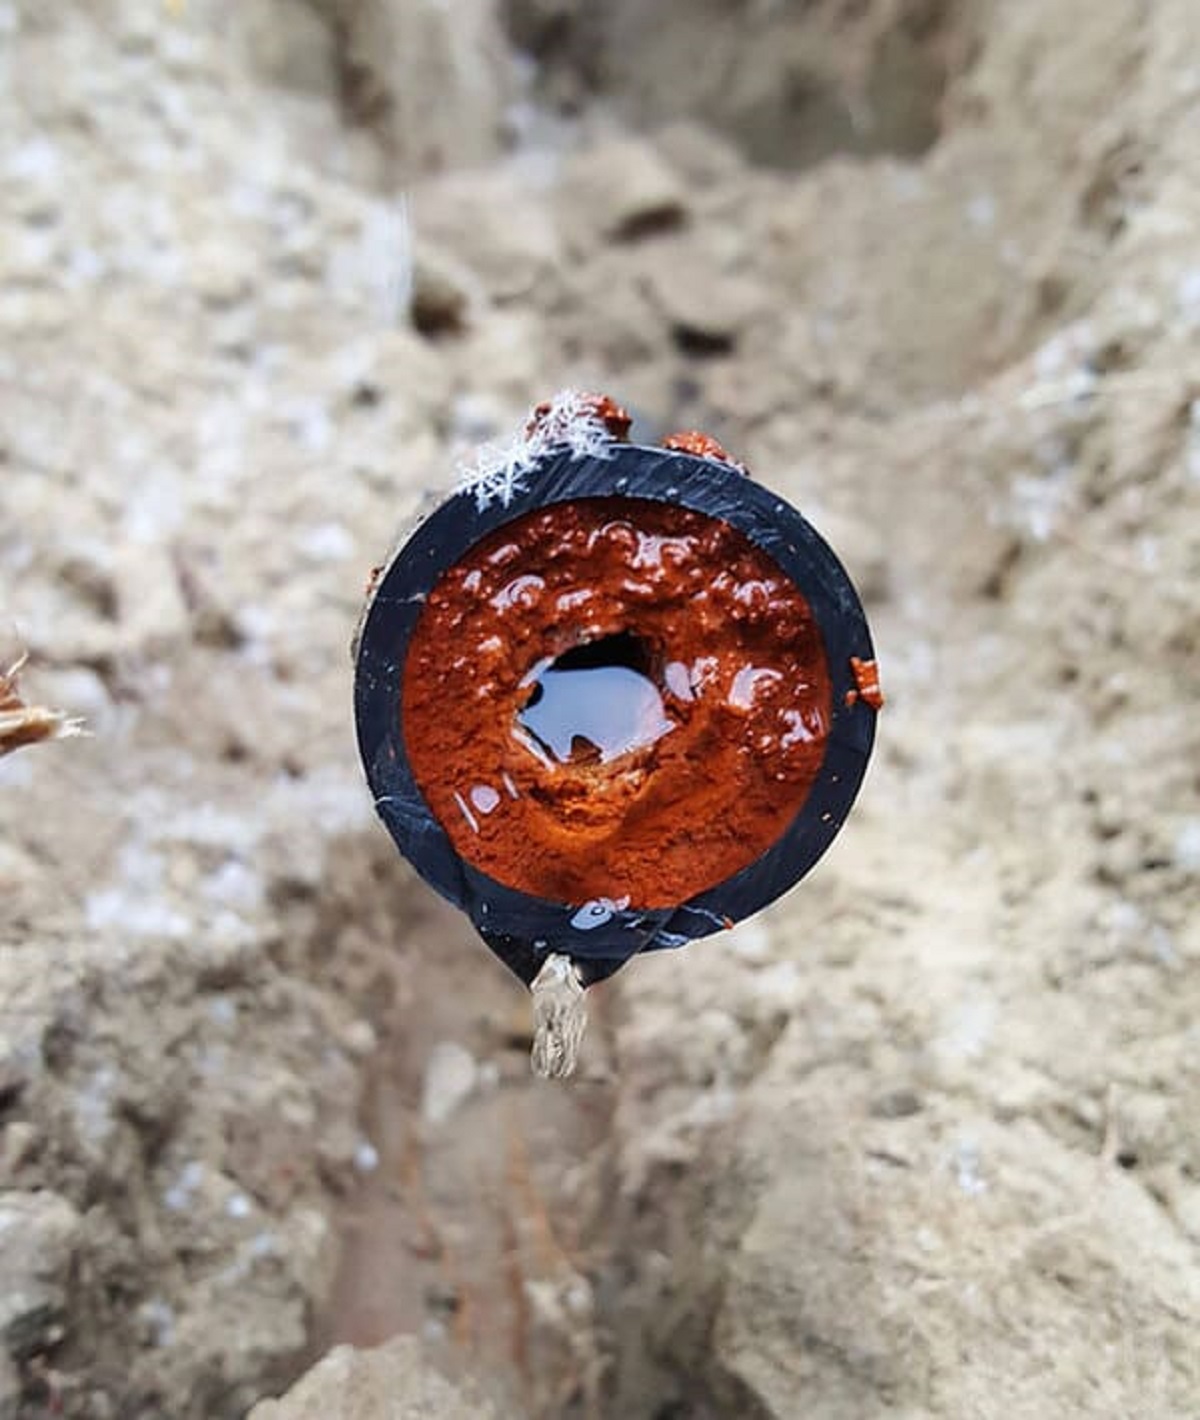 “This Is What 15 Years Of Rust Accumulation Looks Like In A 1 Water Pipe”